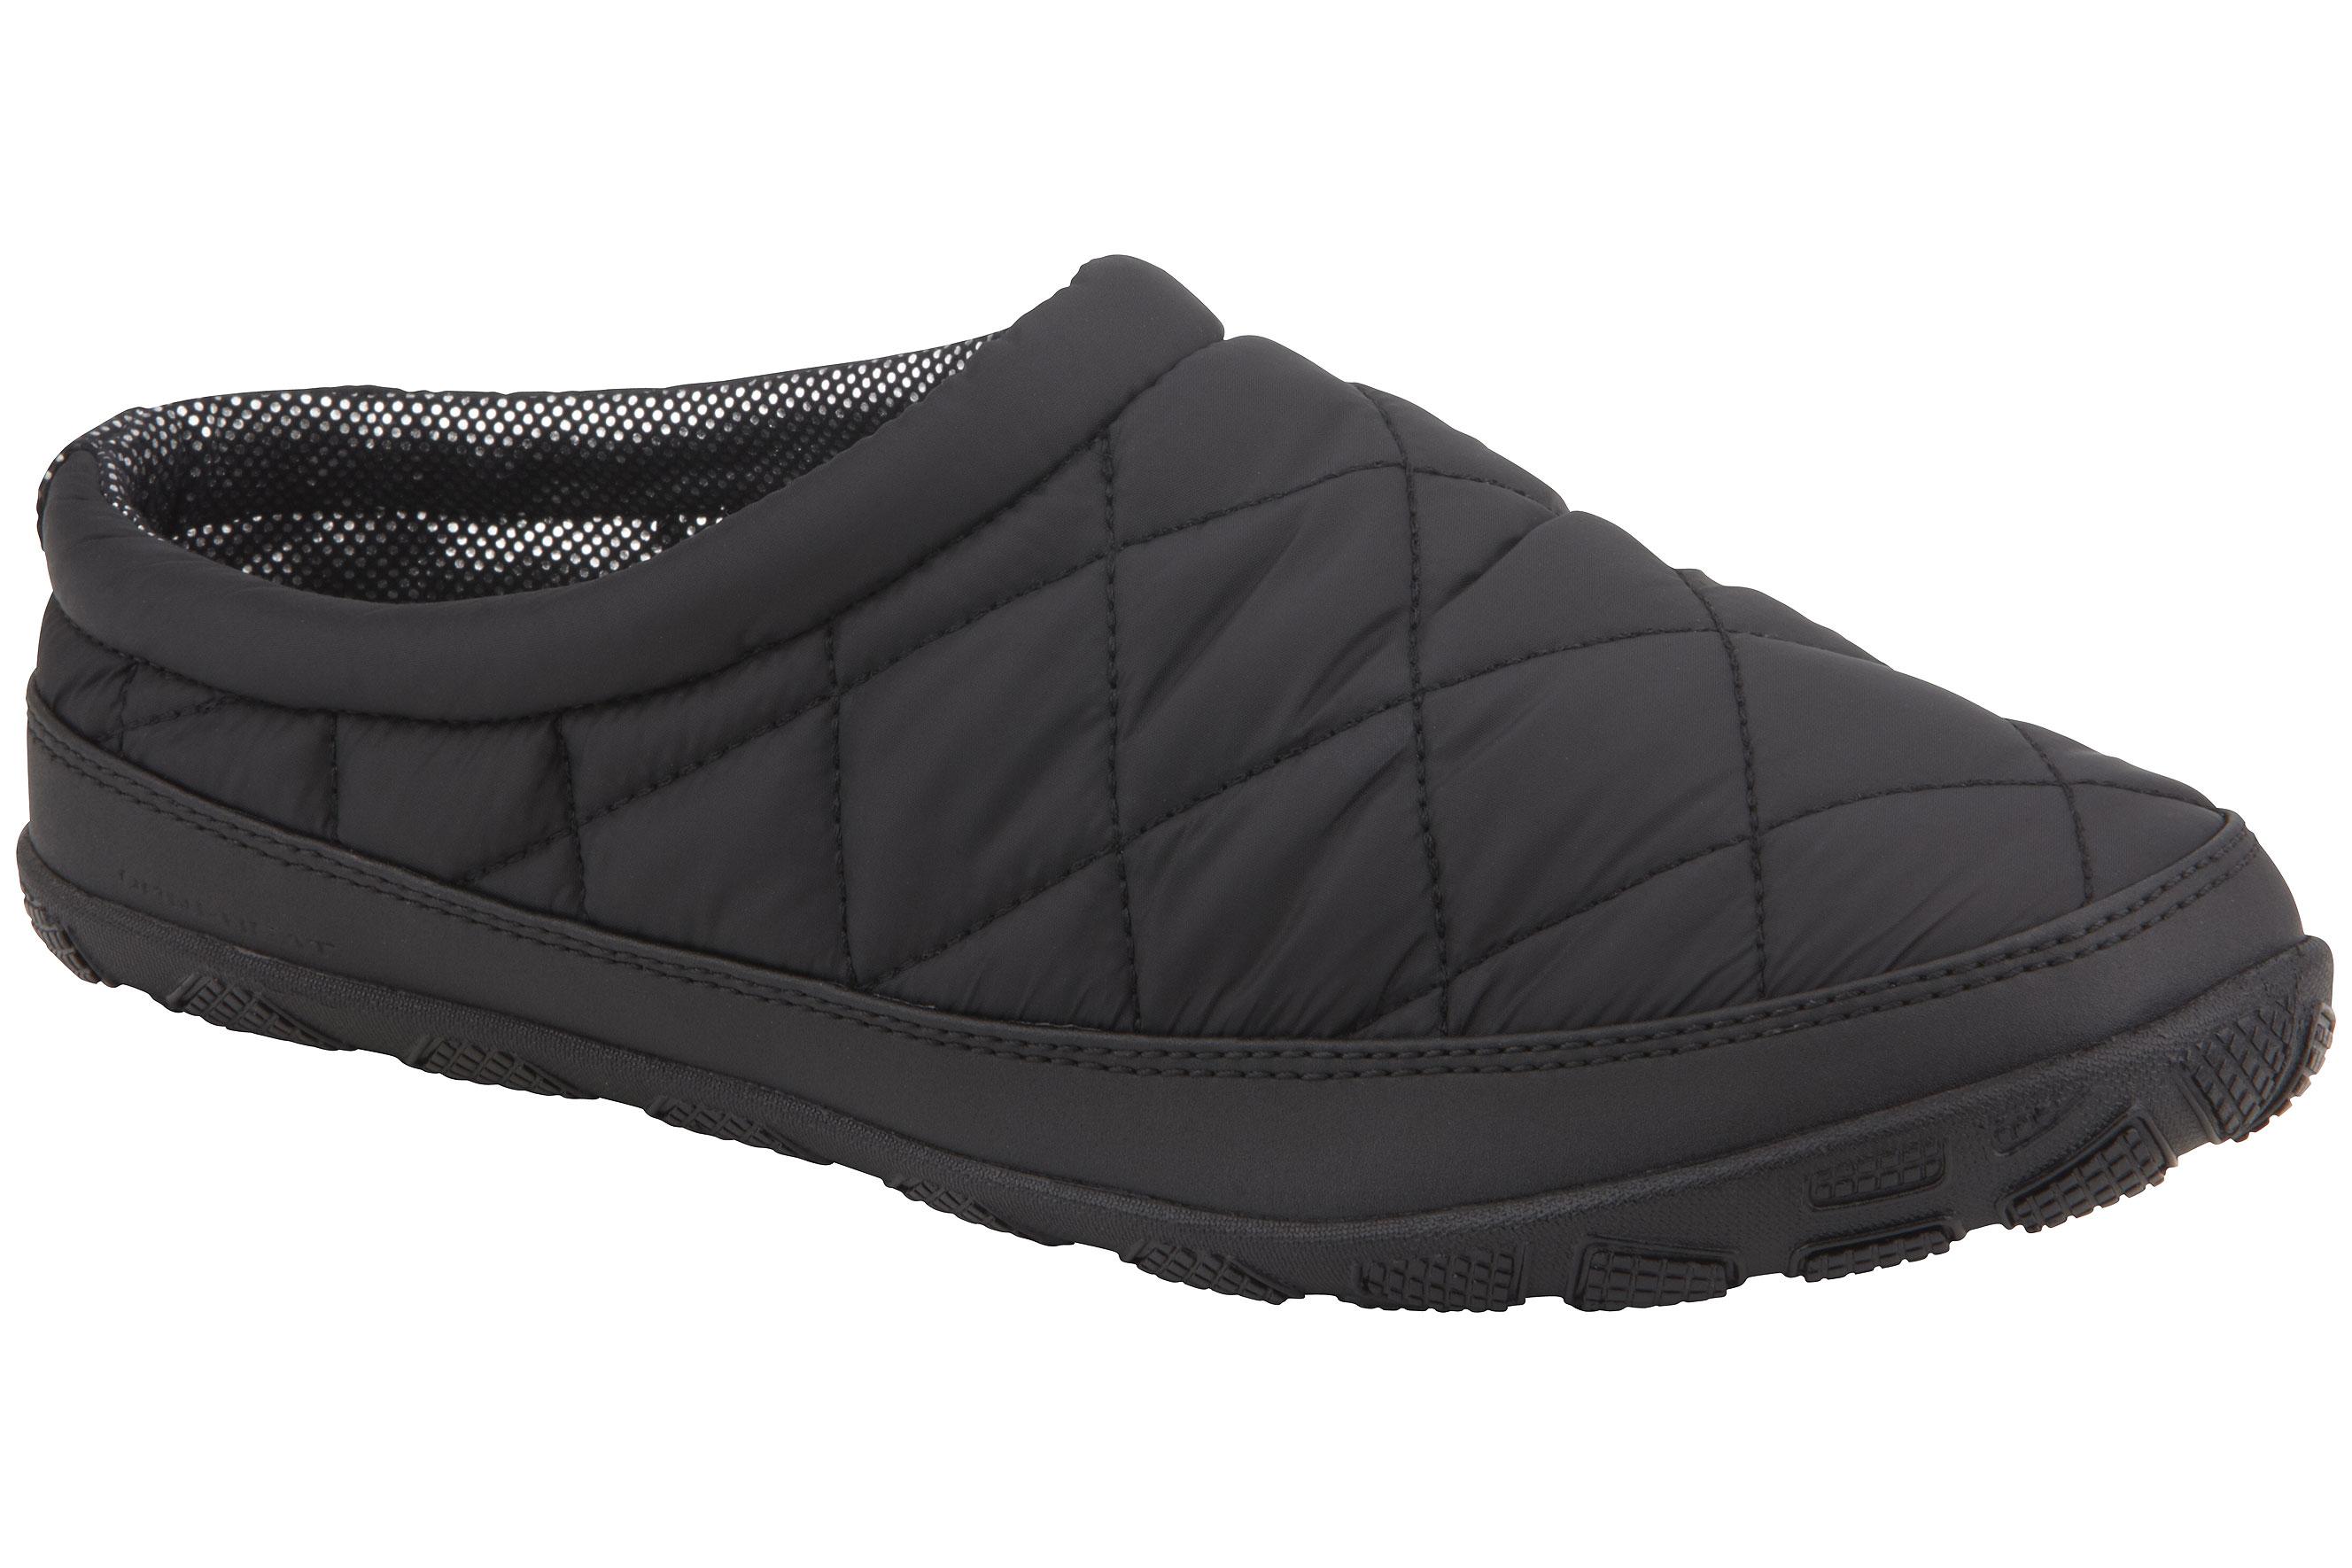 Foto Zapatillas Columbia Packed Out Omni-Heat negro para mujer , 43